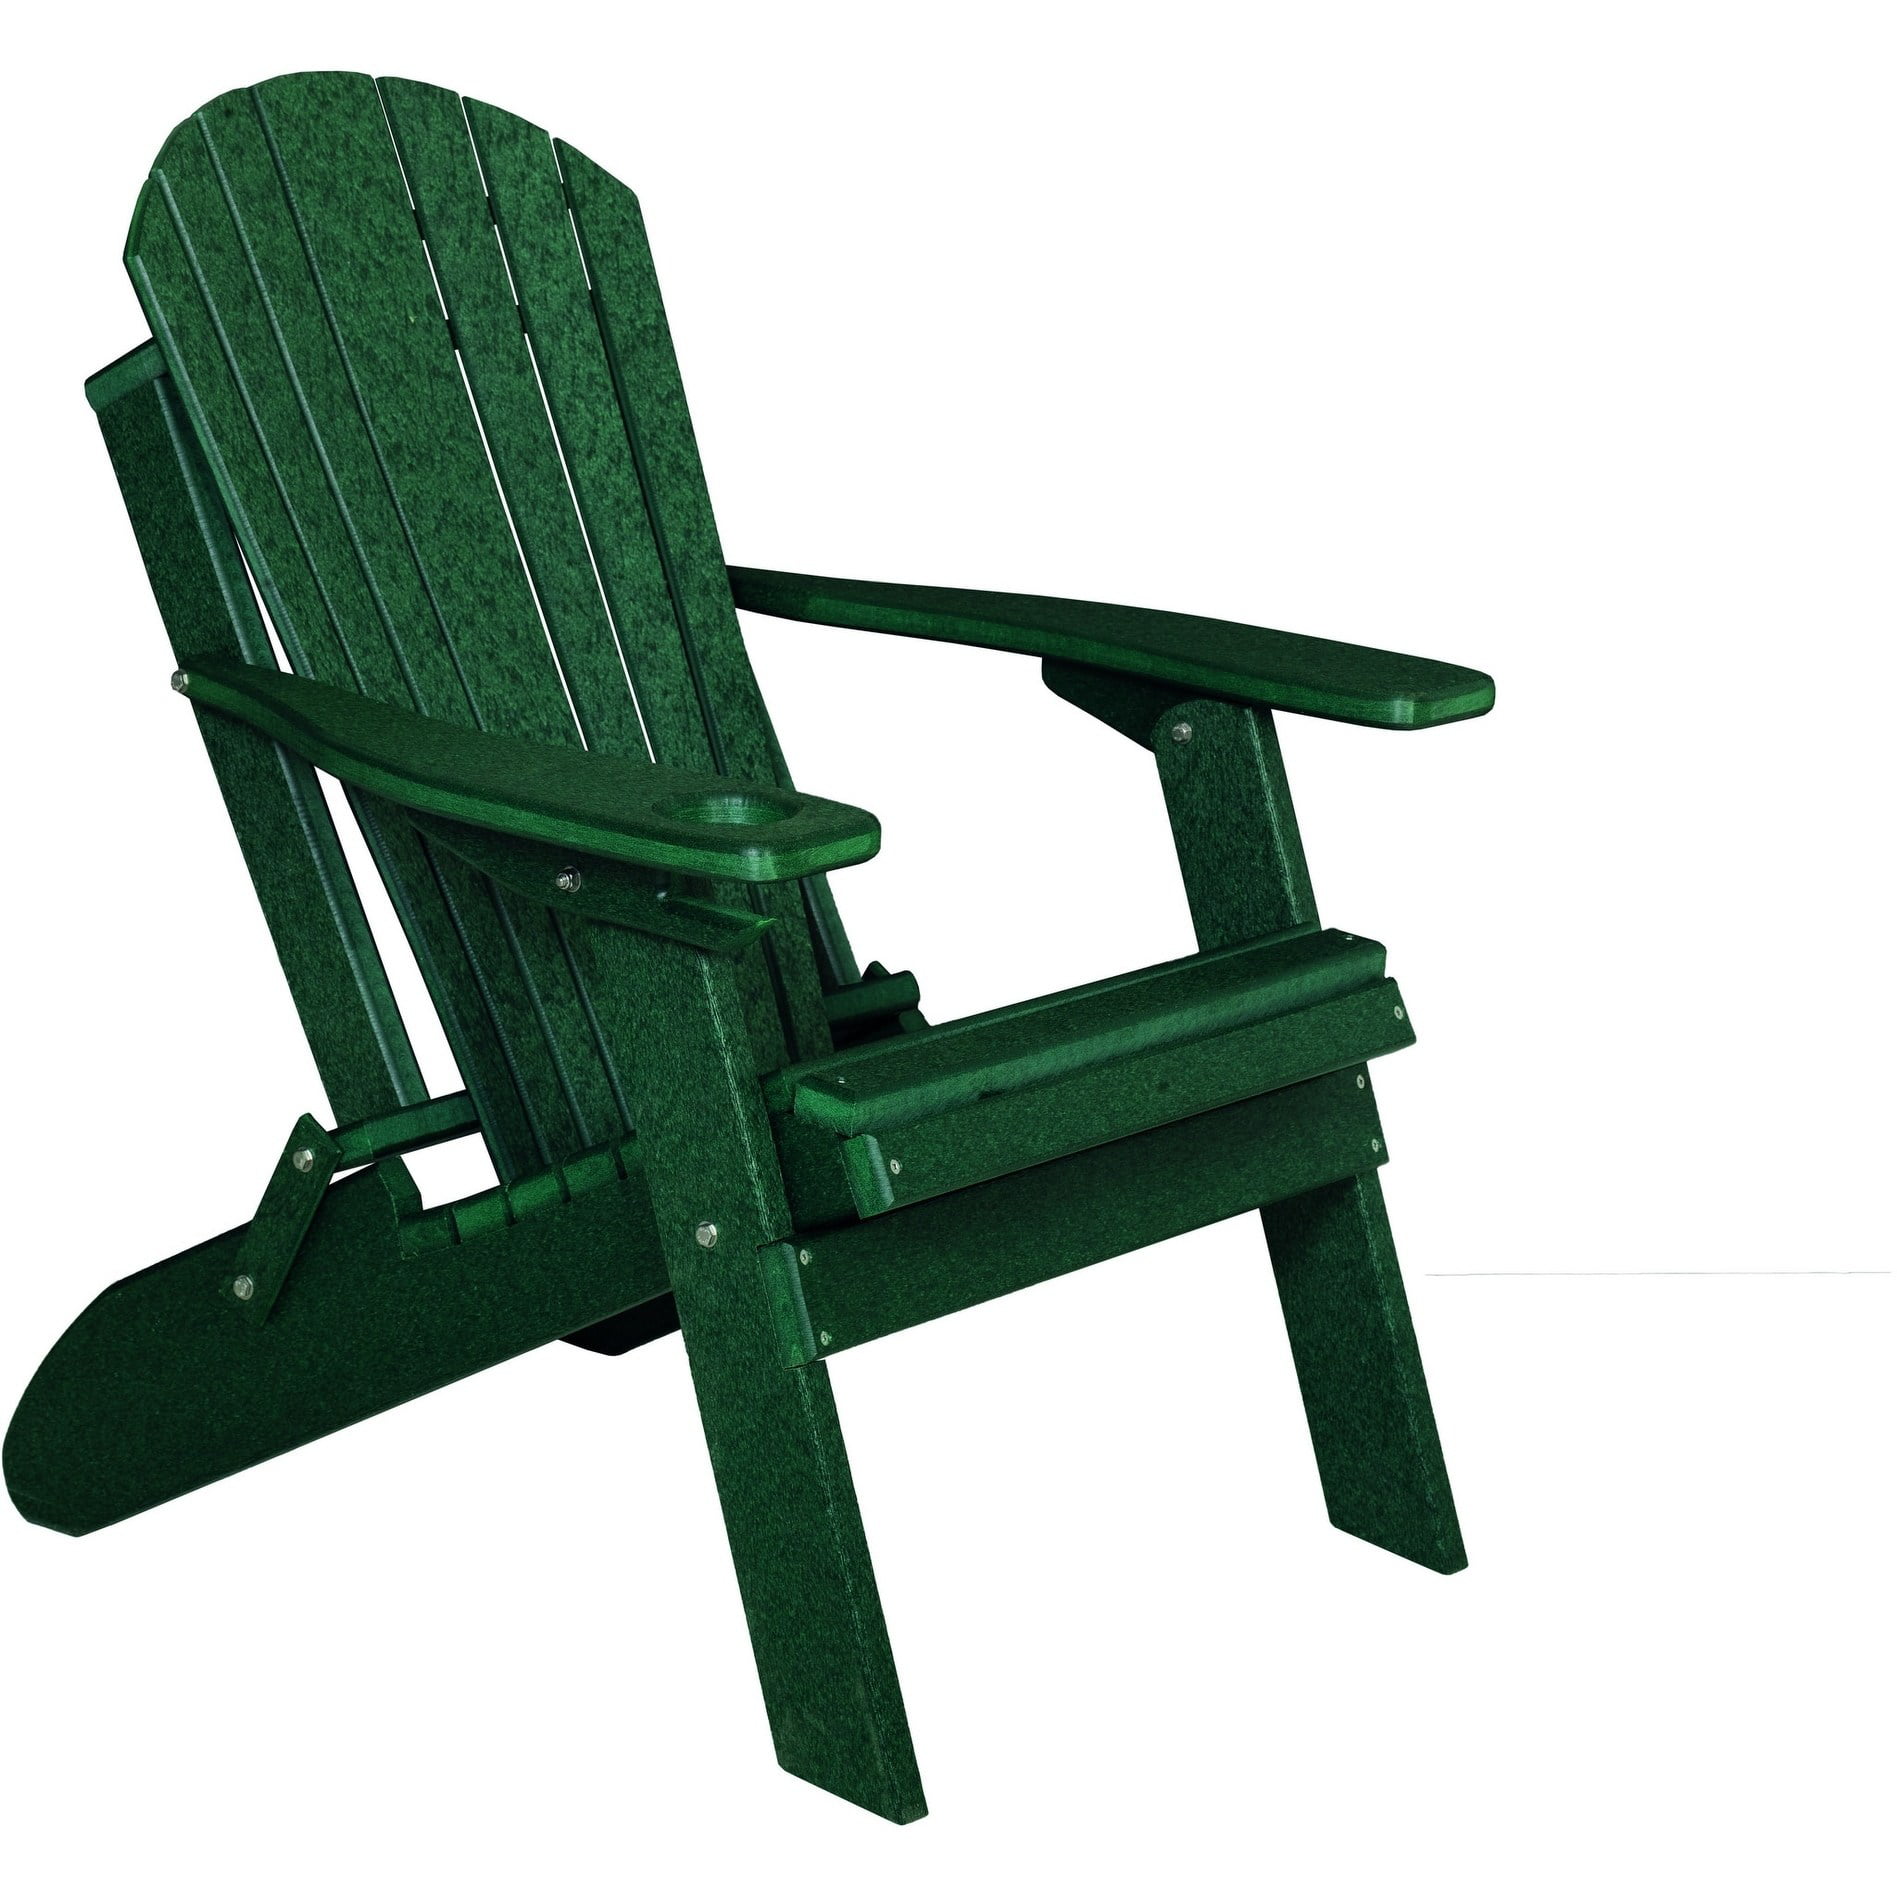 Deluxe Premium Poly Lumber Folding Adirondack Chair w/ Cup